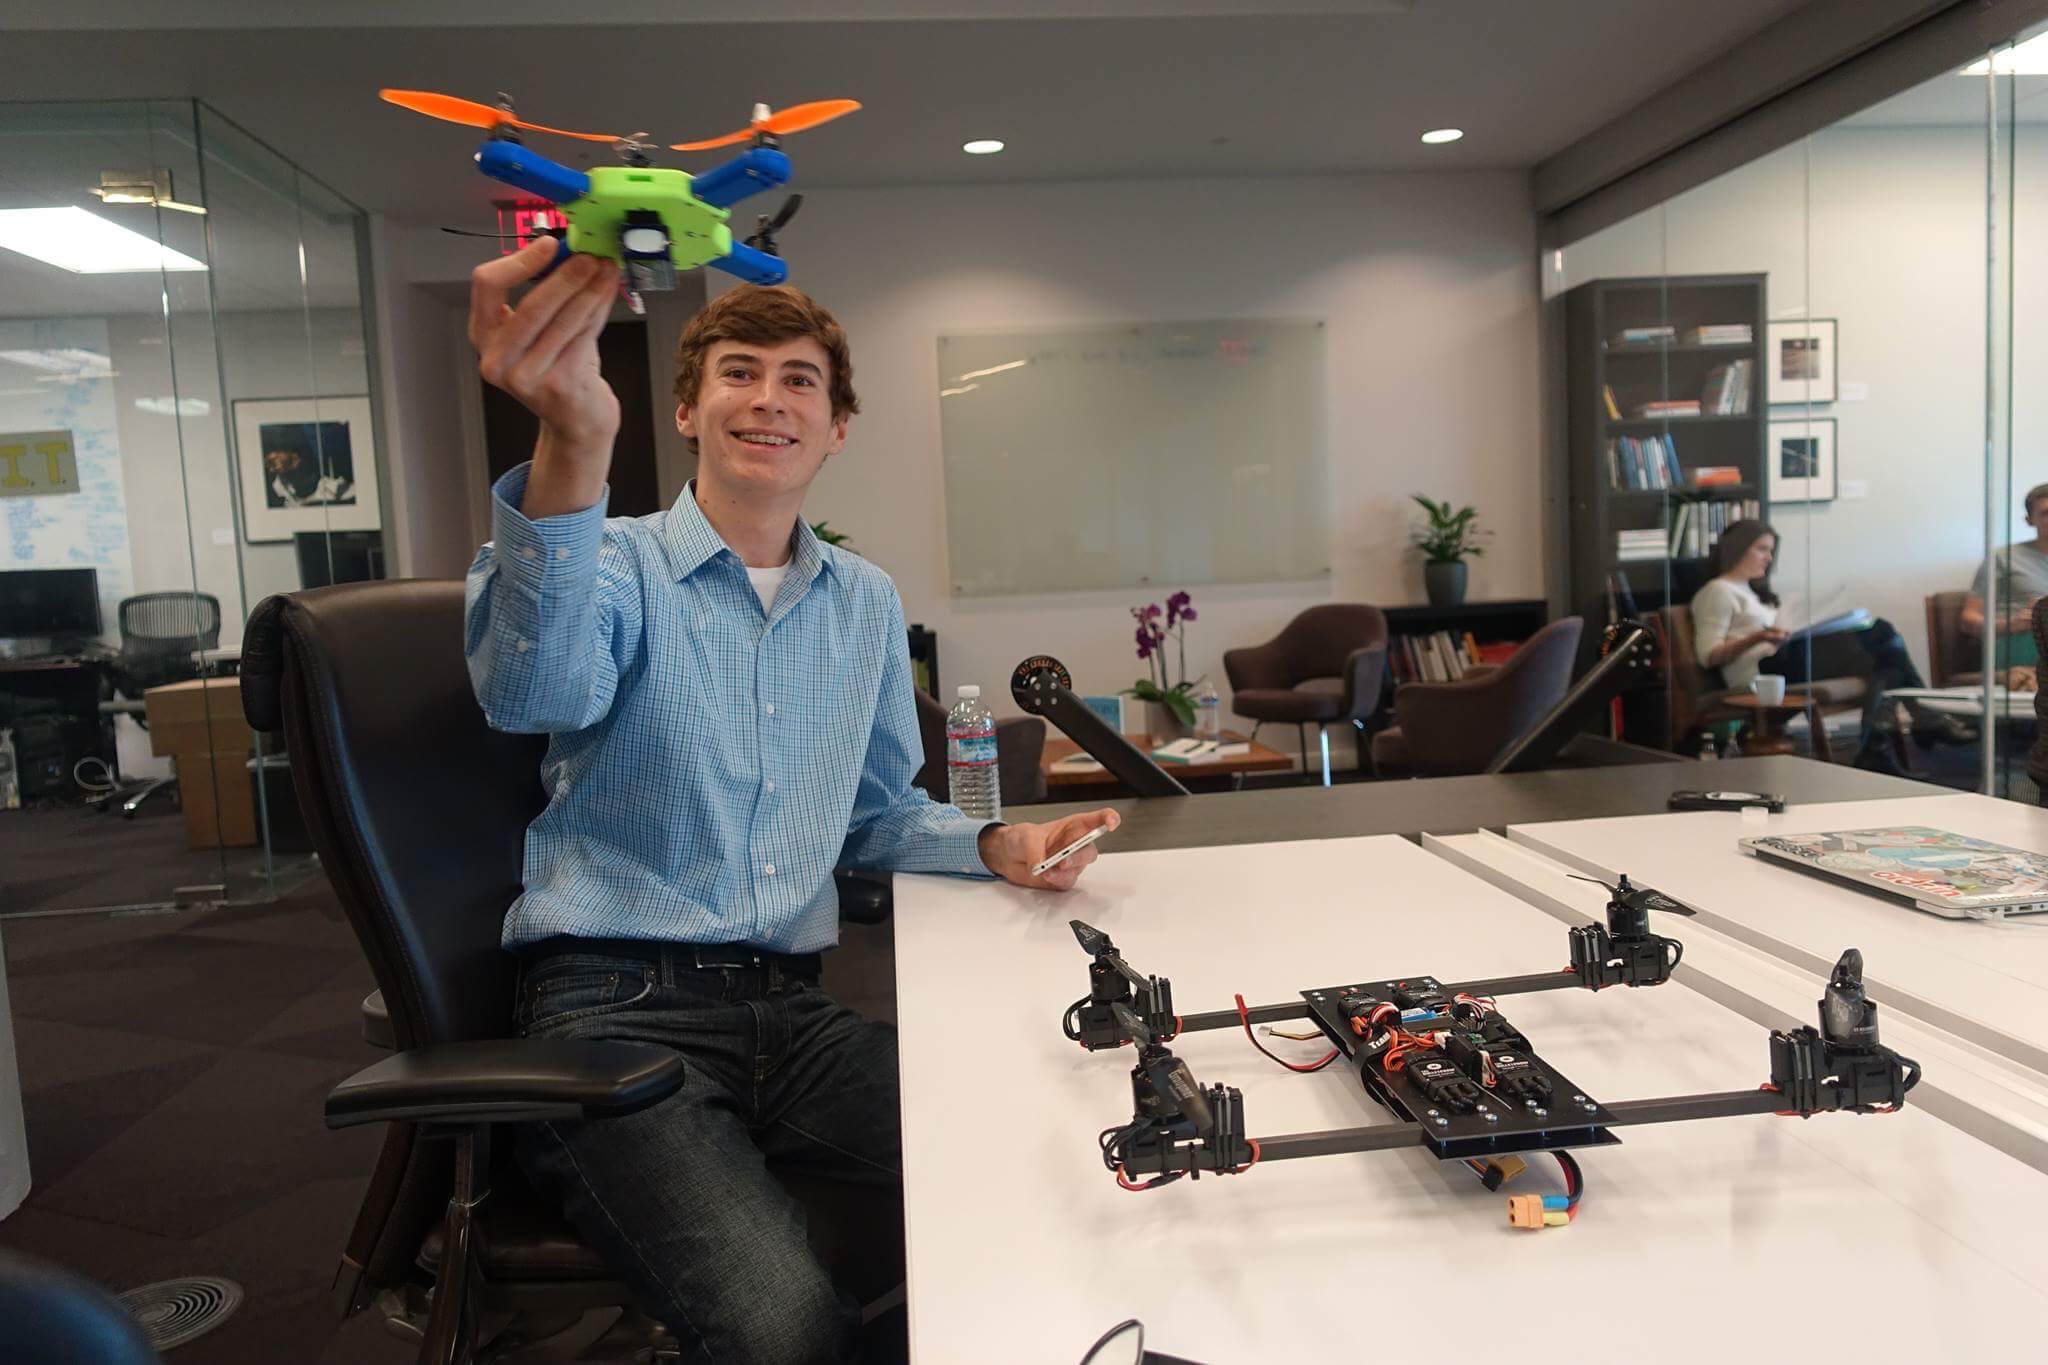 And became a key player in national security by creating app-powered, military-grade drones.